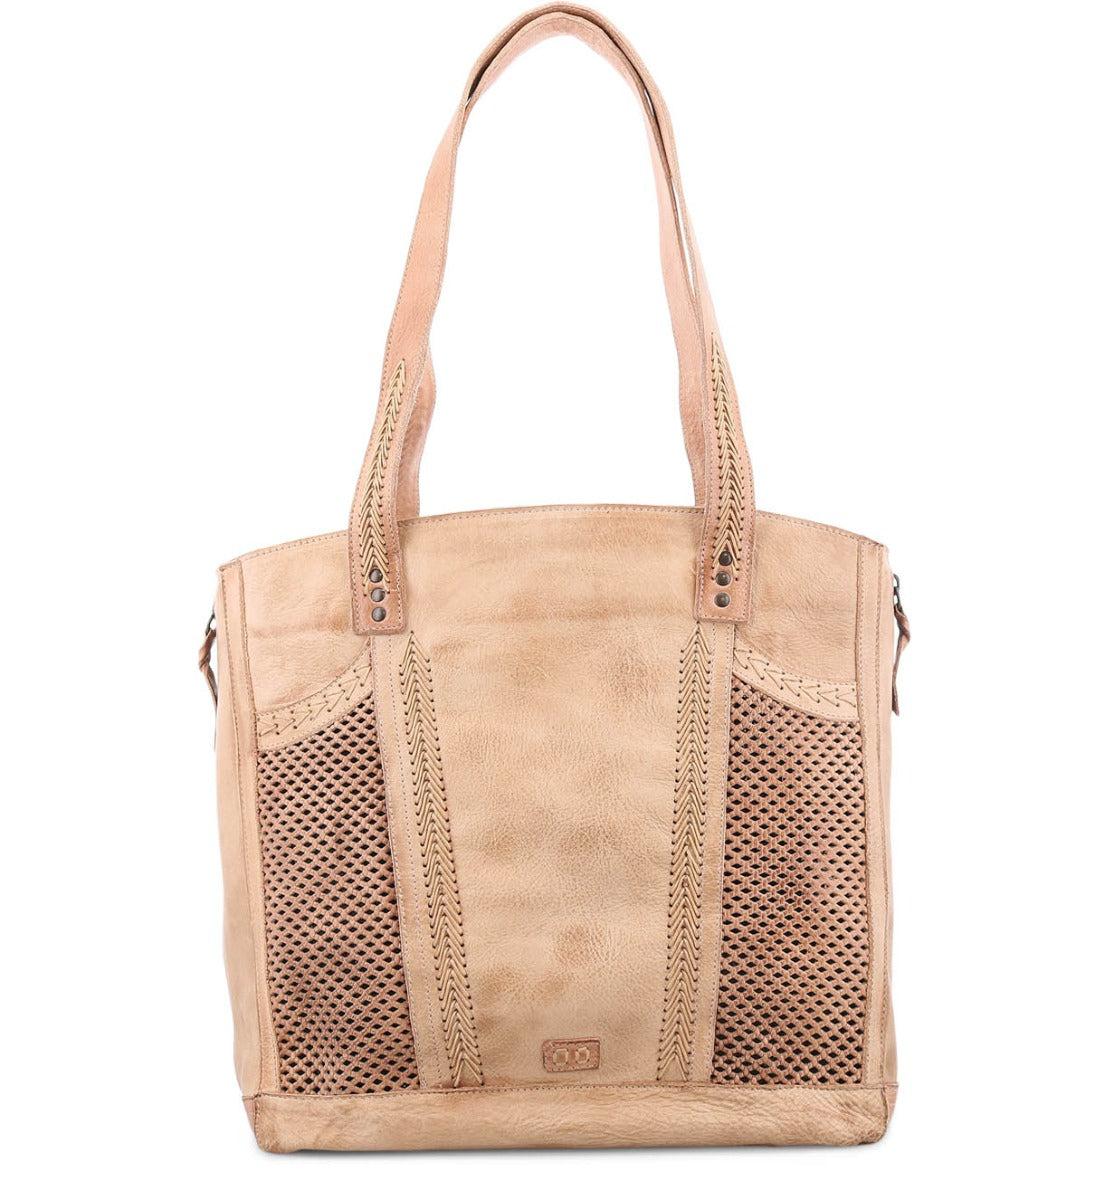 An Amelie beige tote bag with mesh detailing by Bed Stu.